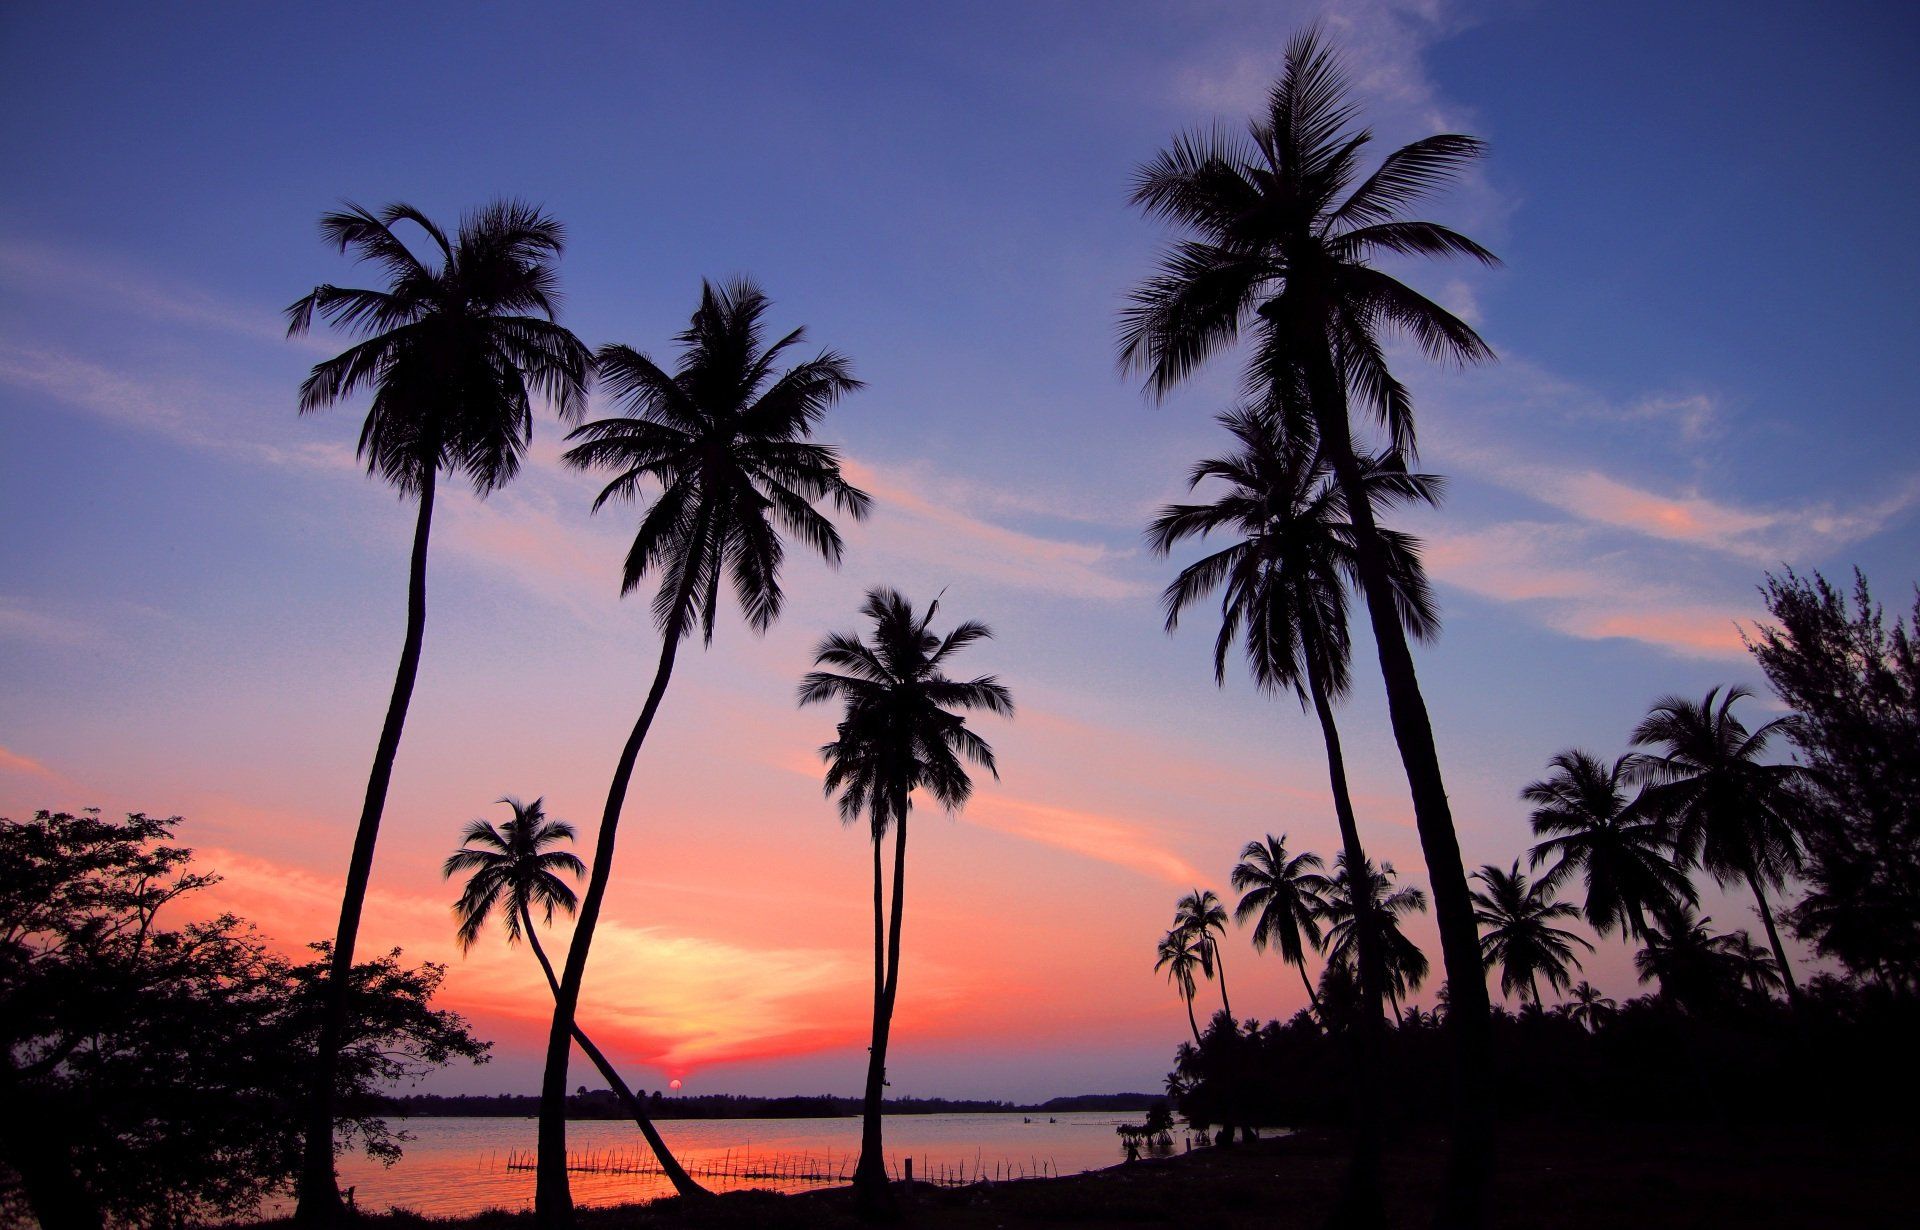 A sunset with palm trees in the foreground